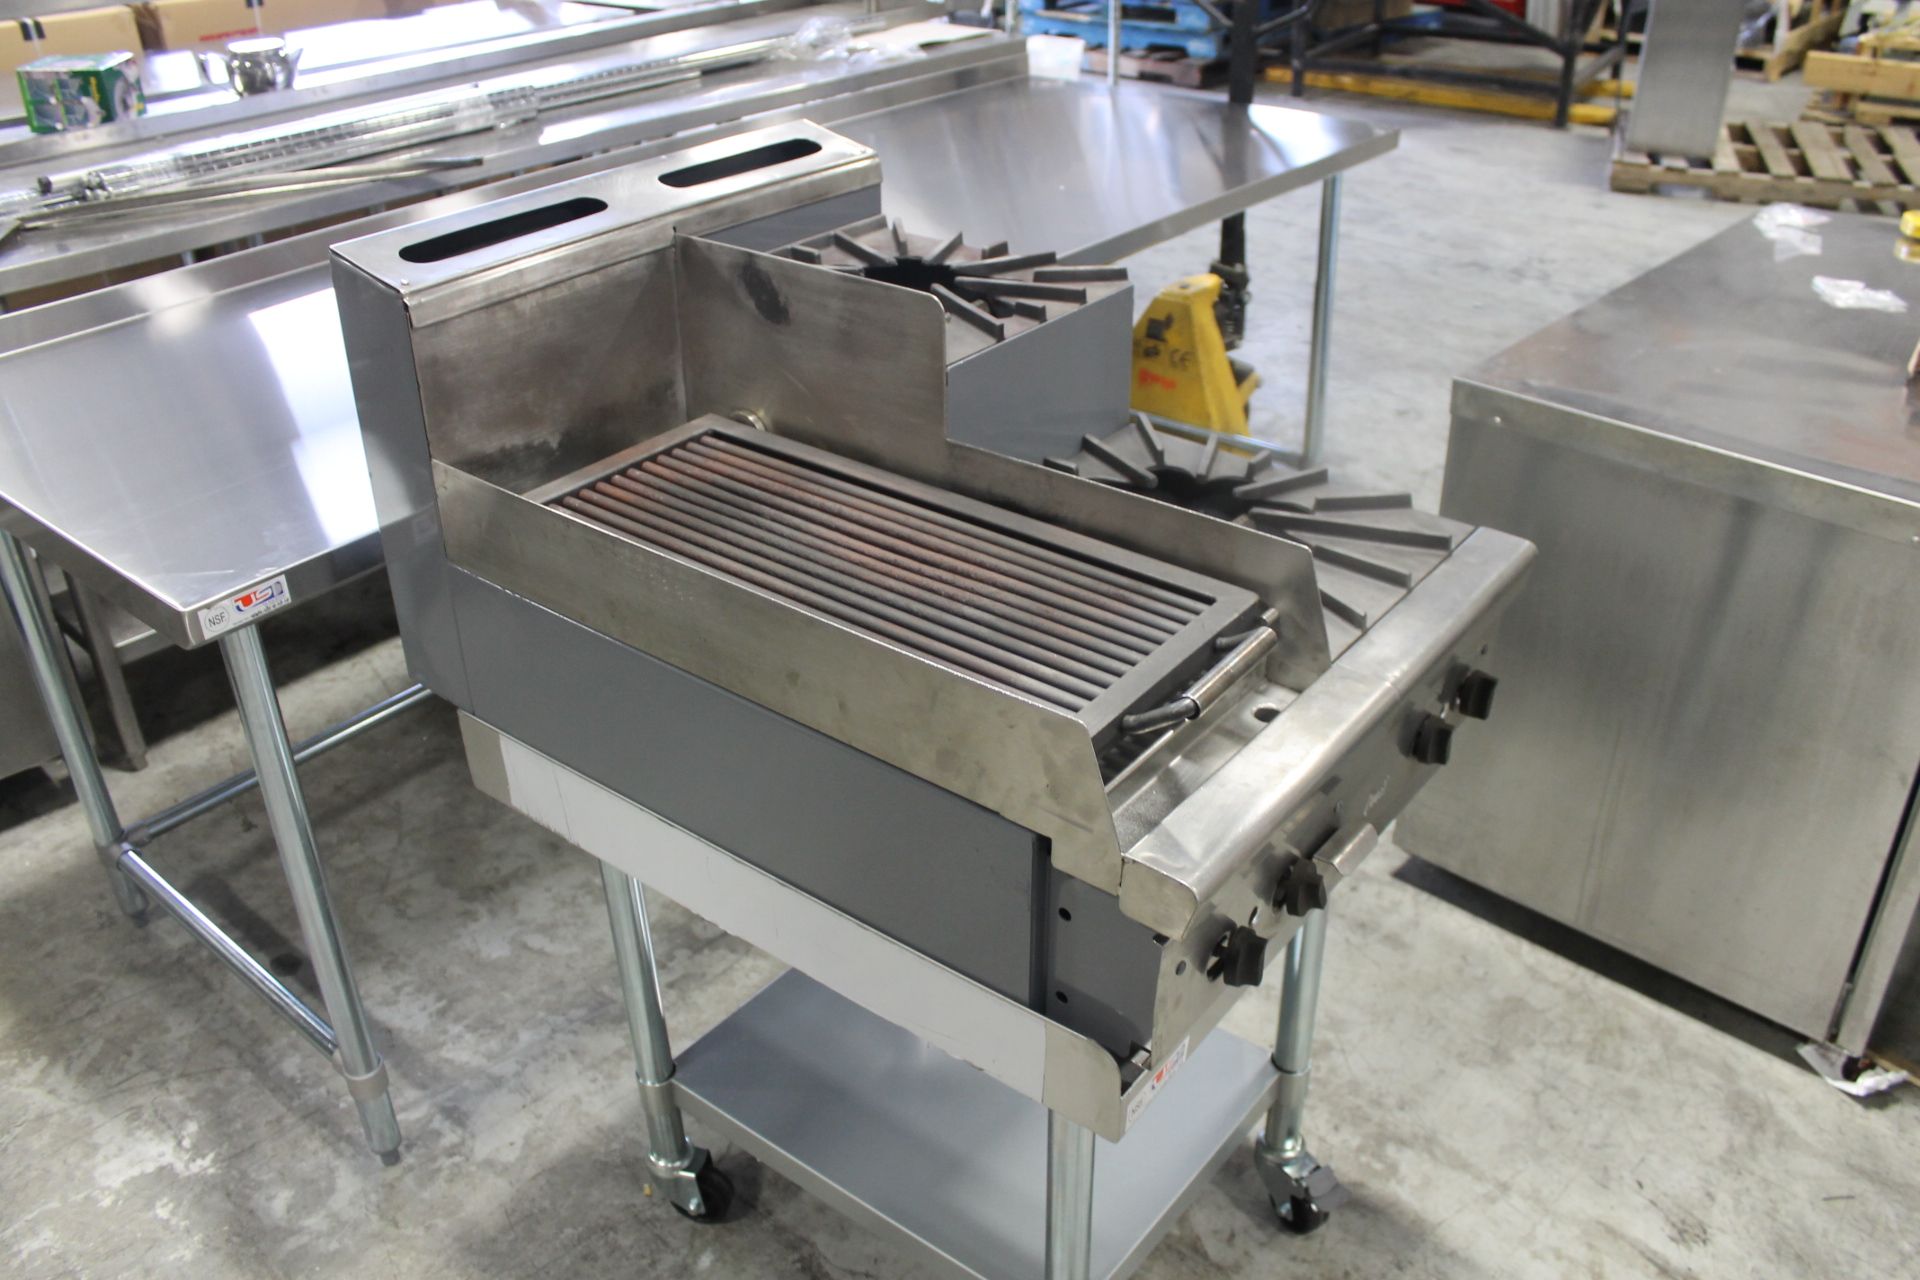 Quest Comination Broiler/Step-Up Hot Plate - 2 Burner/12" Charbroiler - Natural Gas - Refurb (with - Image 3 of 4